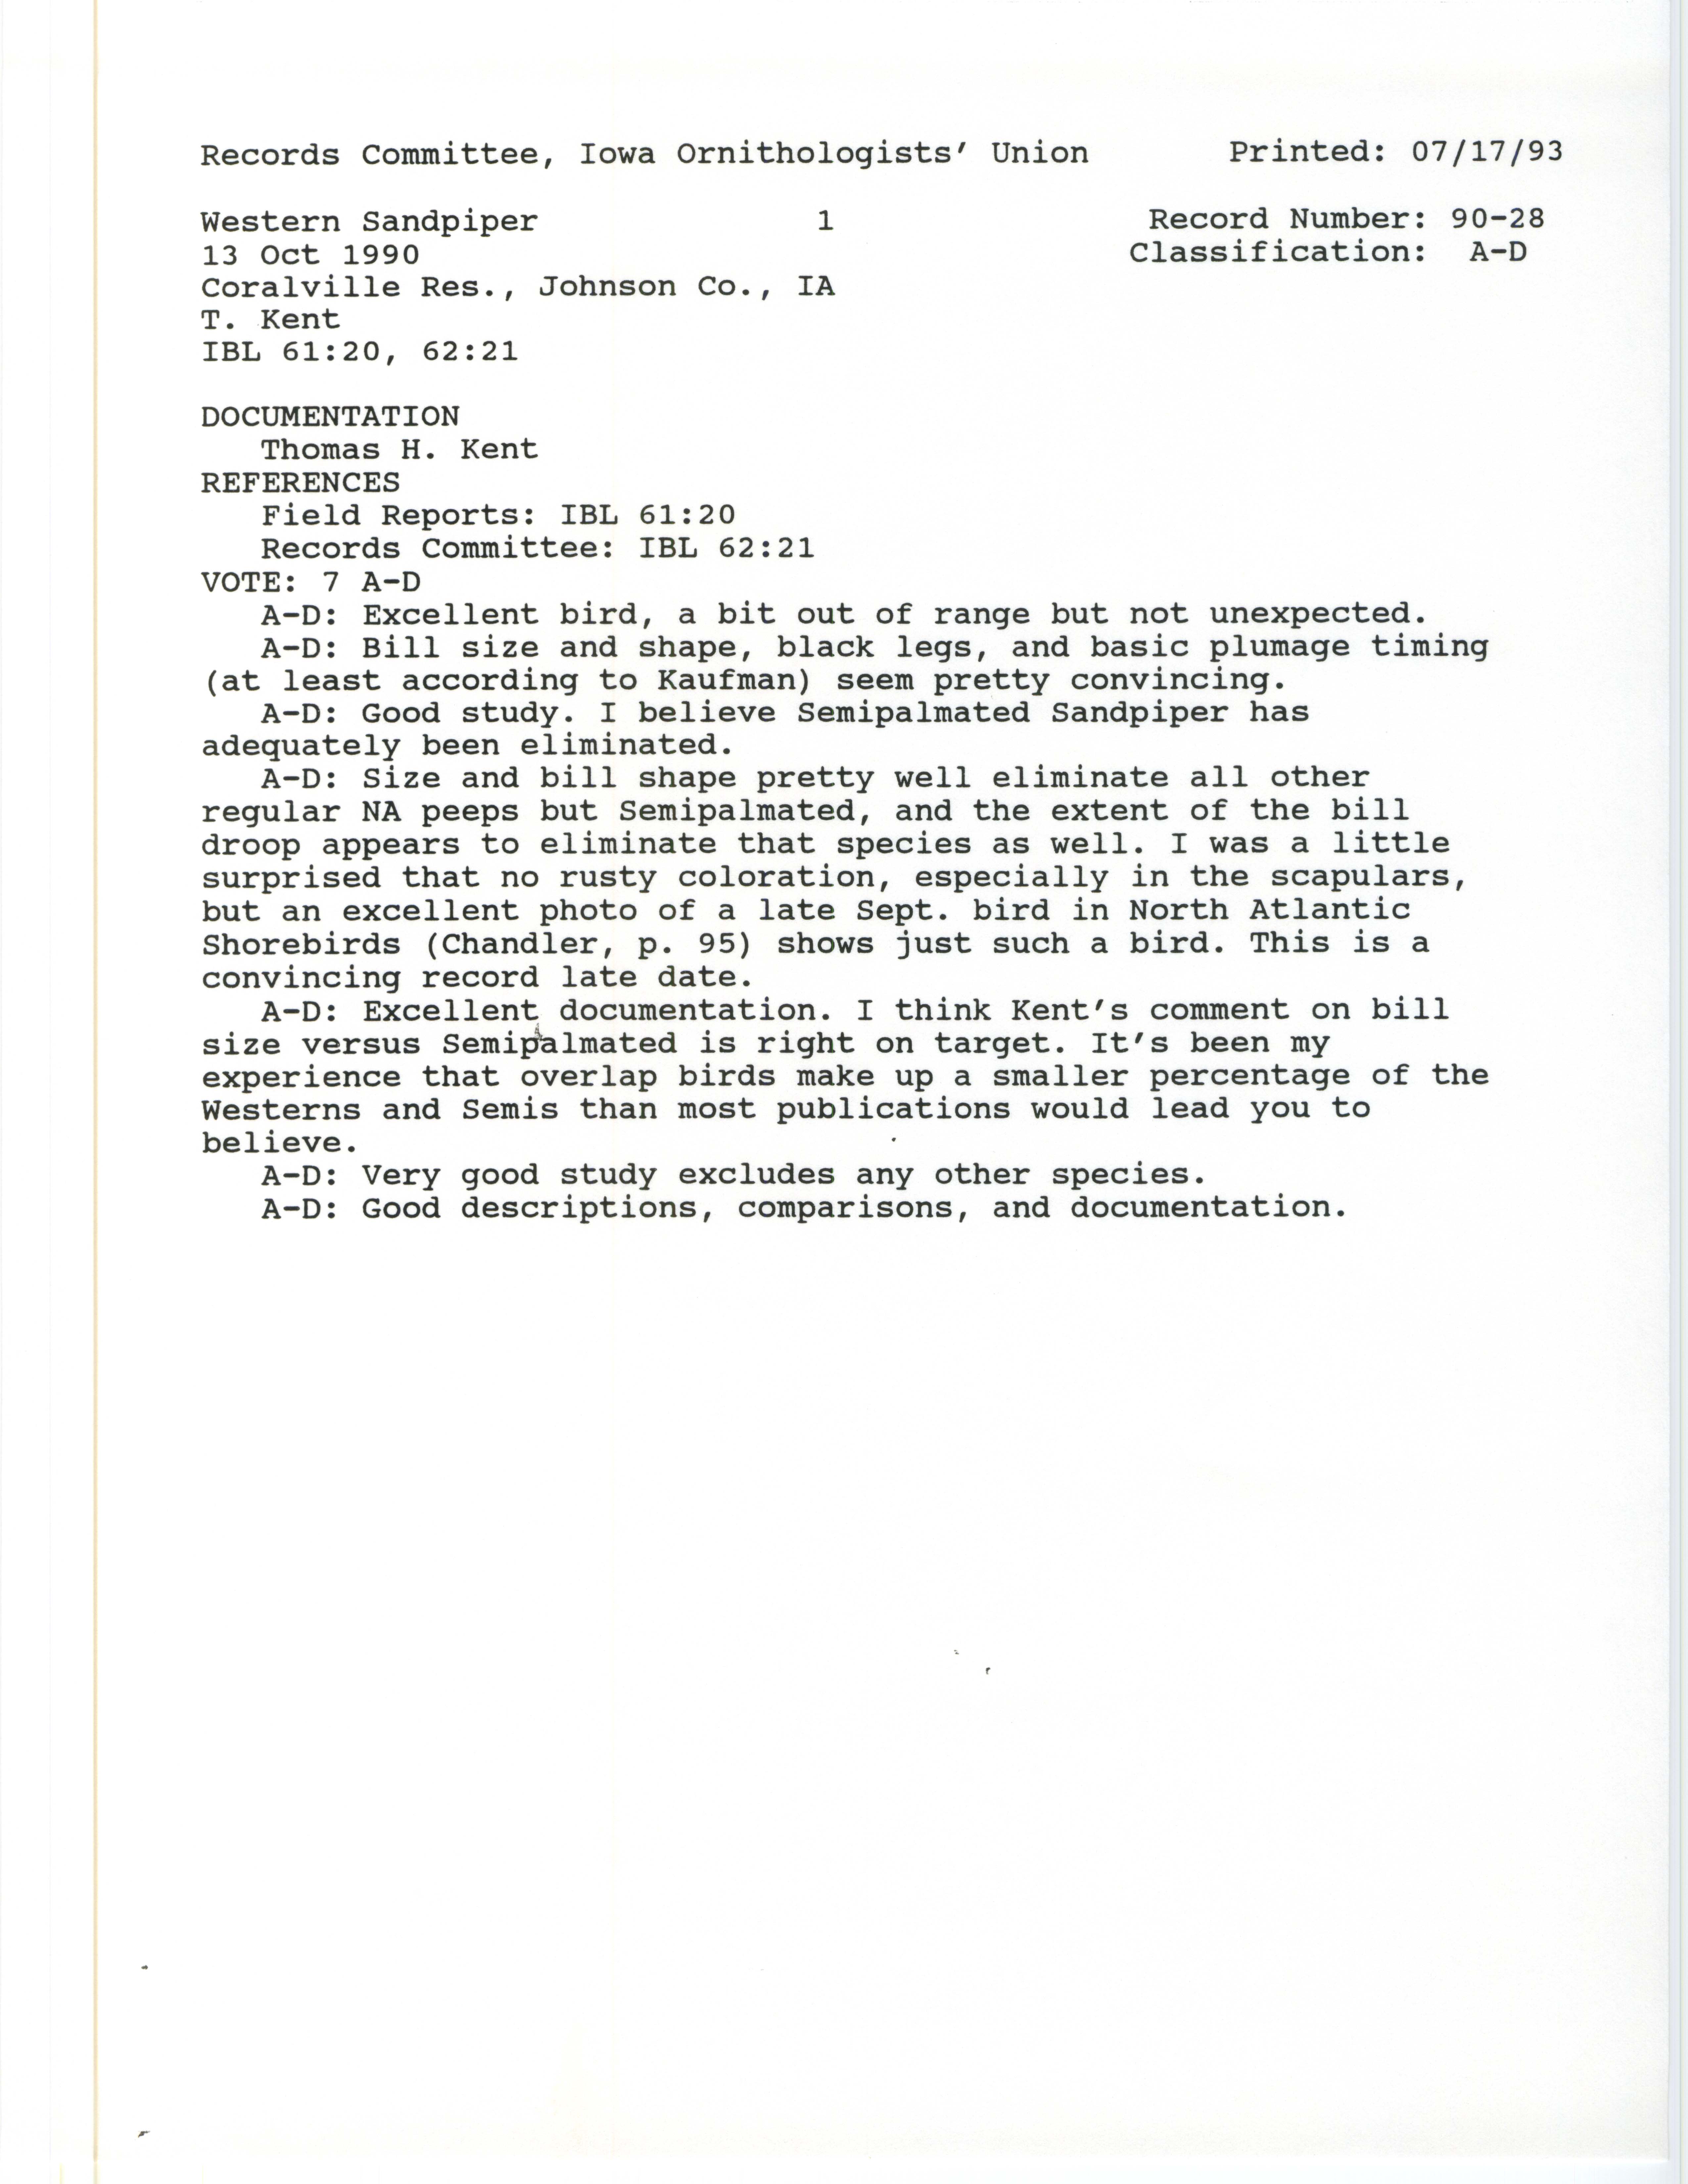 Records Committee review for rare bird sighting of Western Sandpiper at Babcock Access at Coralville Reservoir, 1990